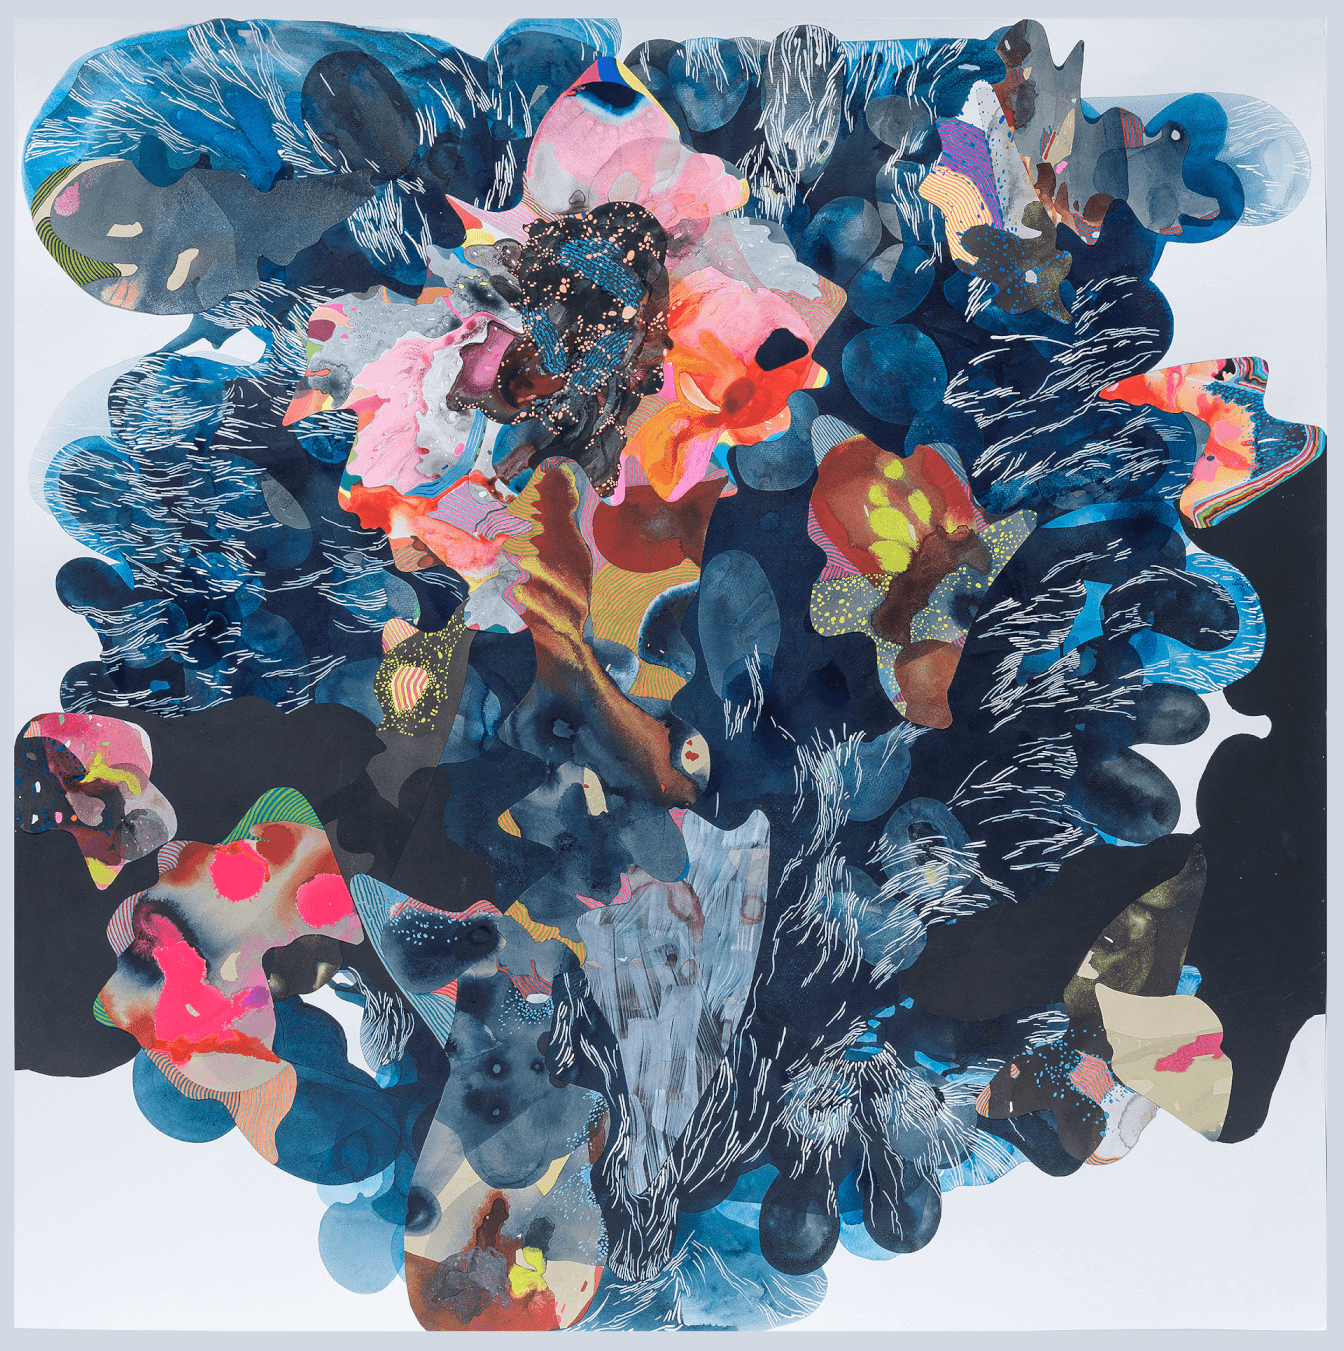 Blue Sea, 2017, 48 x 48 inches, ink and collage on paper.